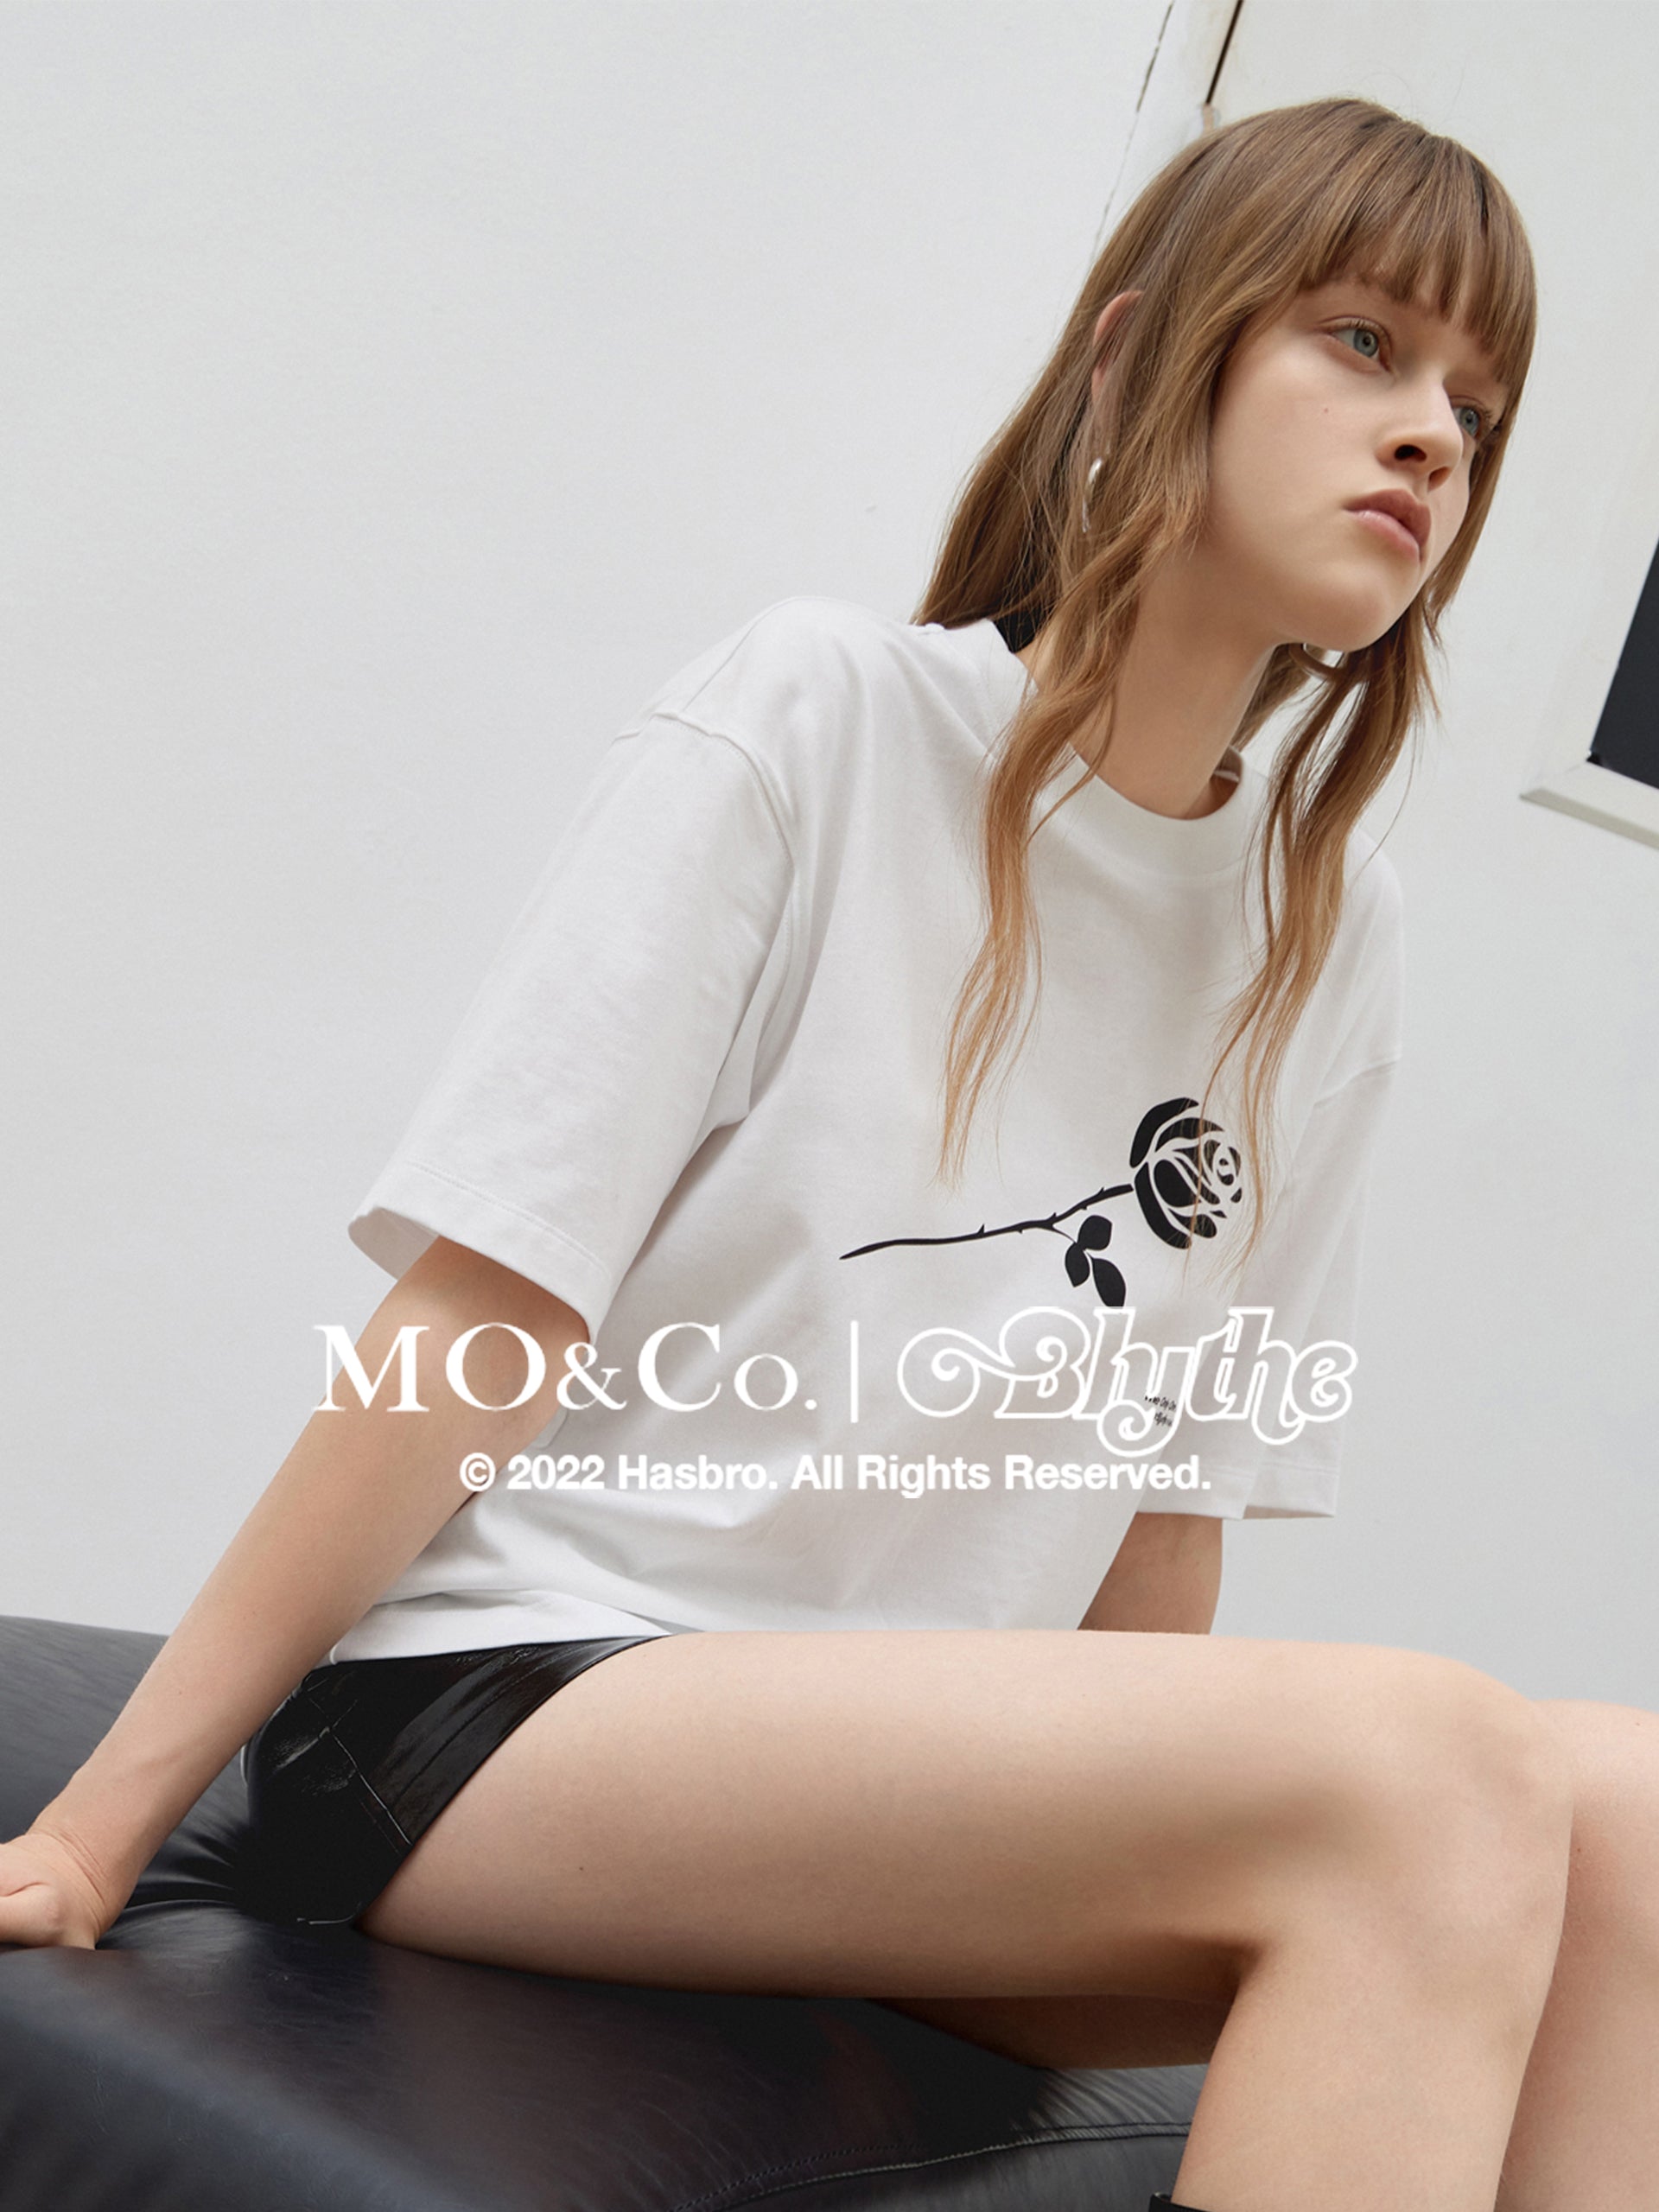 MO&Co.｜Blythe Collaboration Rose Print Cotton T-Shirt Loose Chic Round Neck  Black Tshirts